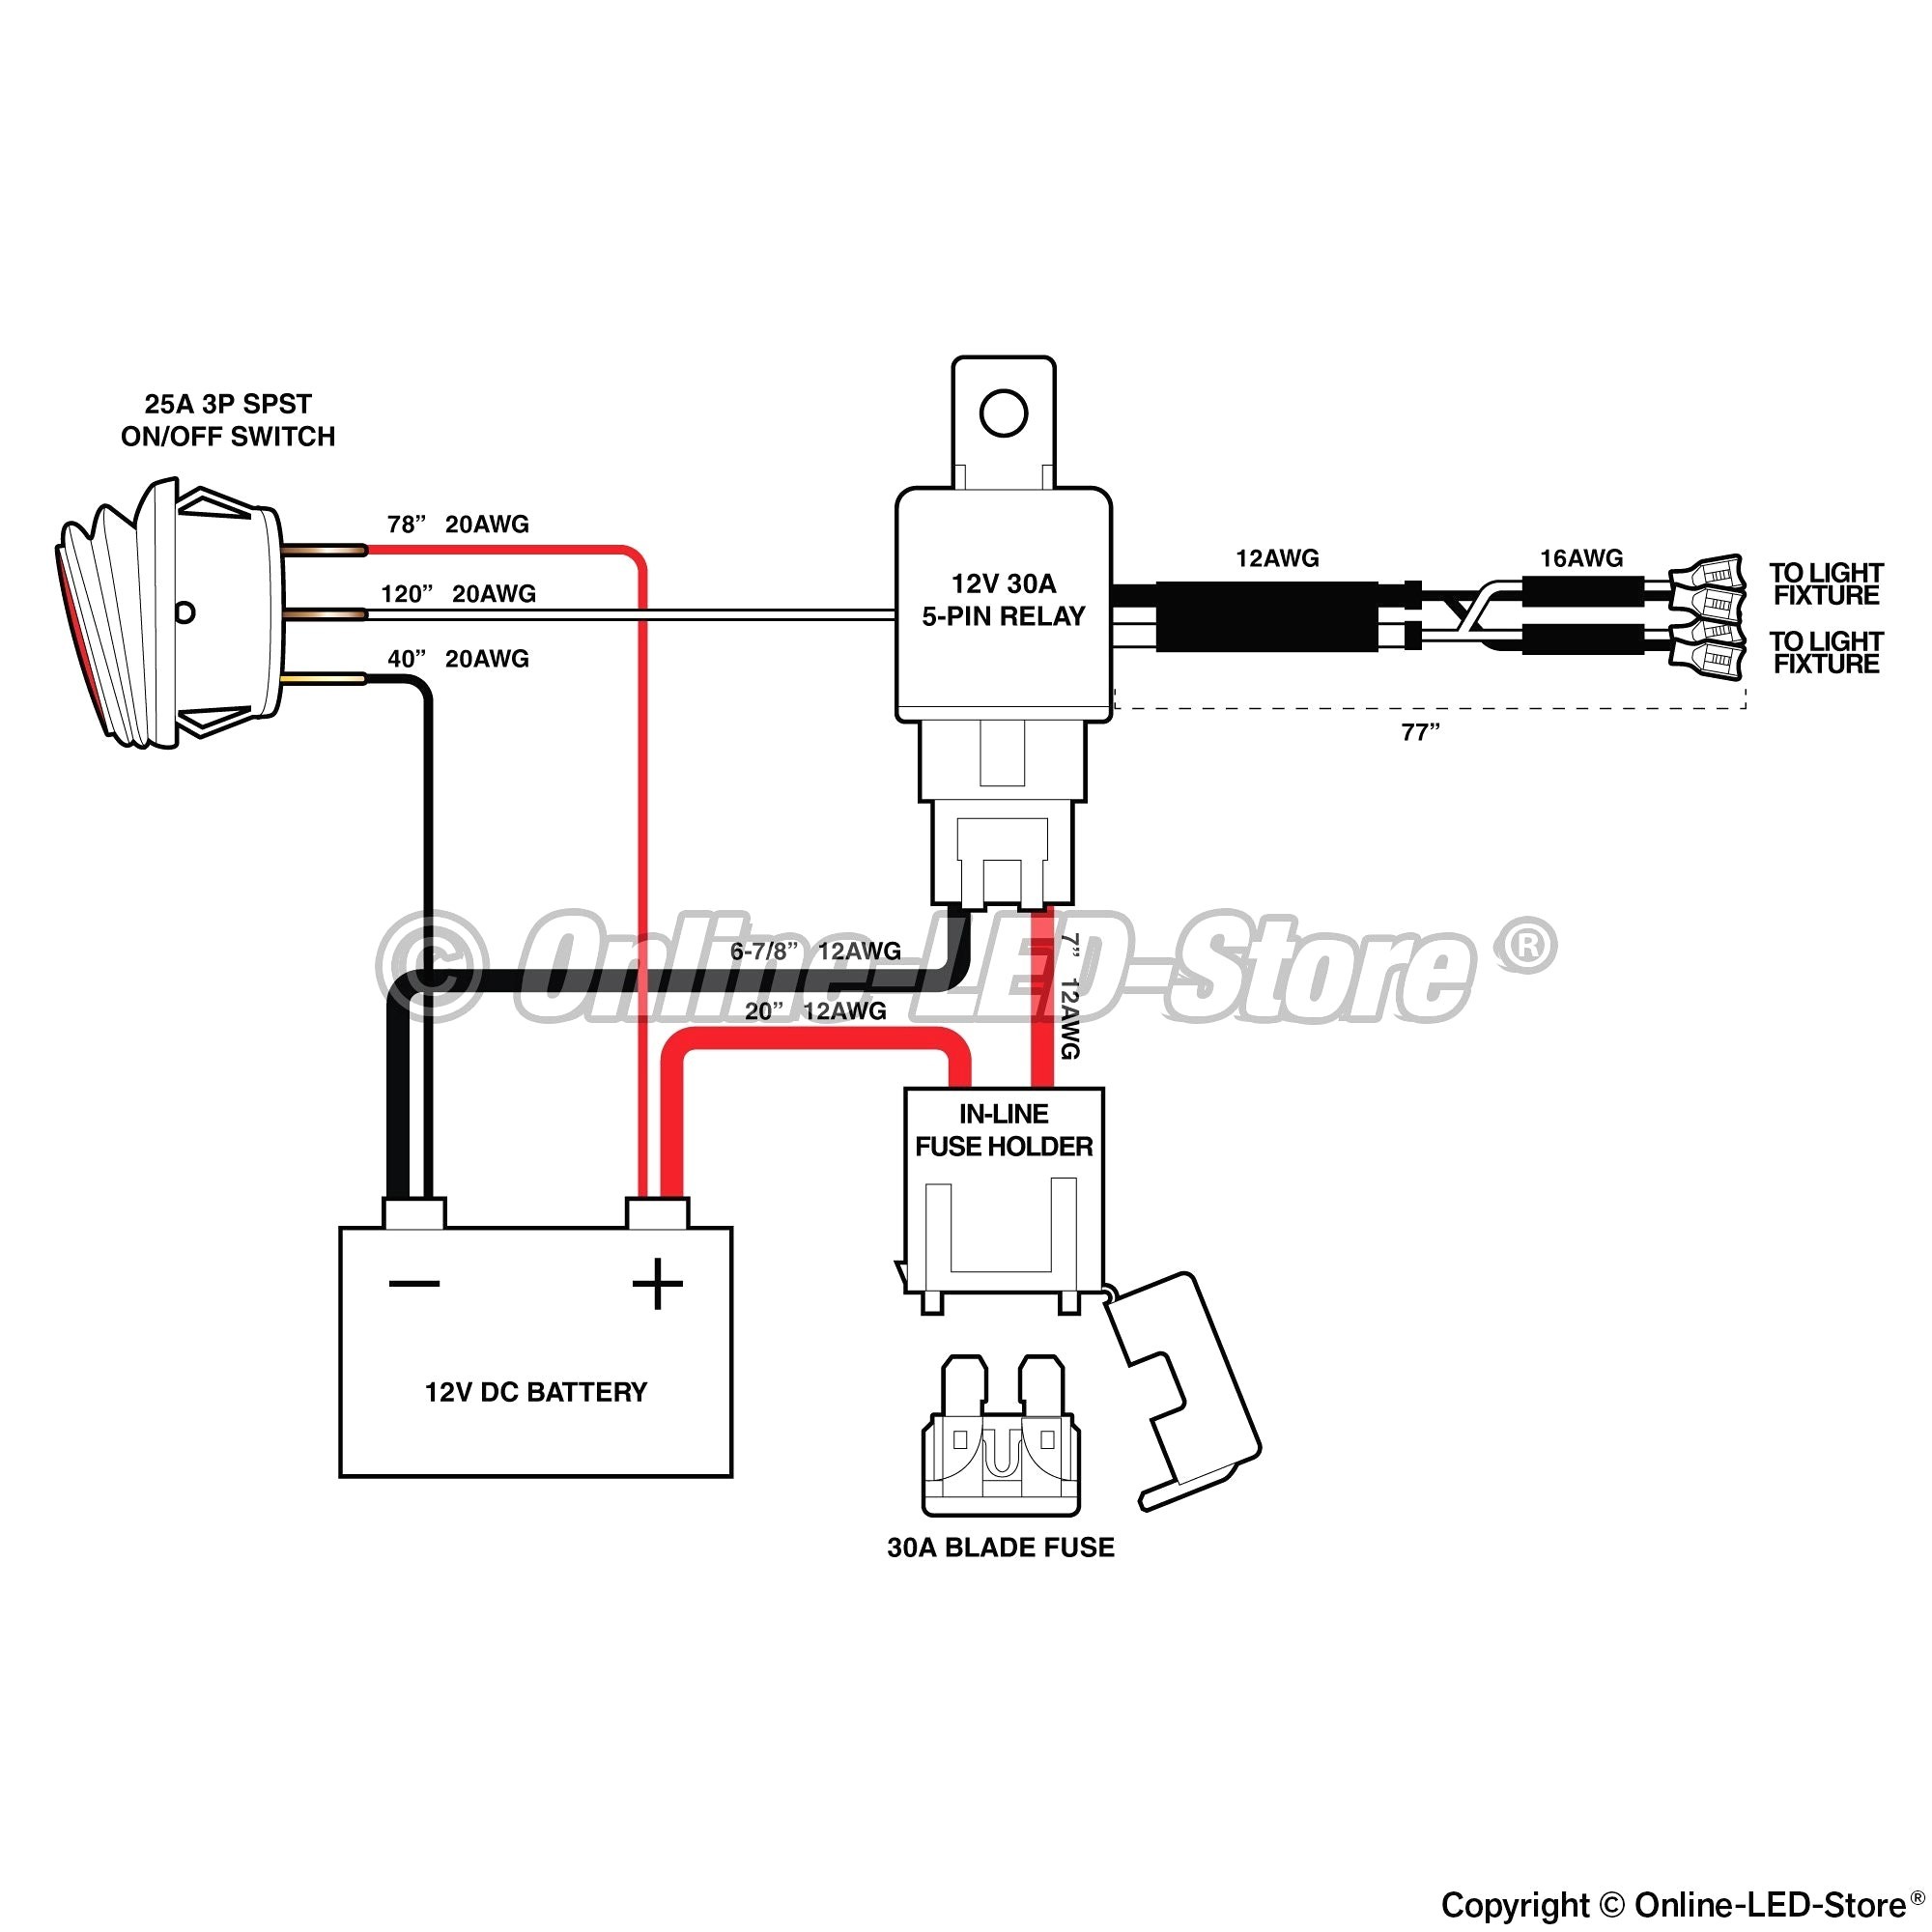 5 Pin Relay Wiring Diagram Stunning 5 Wire Relay Wiring Schematic Ufc204 Us within Of 5 Pin Relay Wiring Diagram